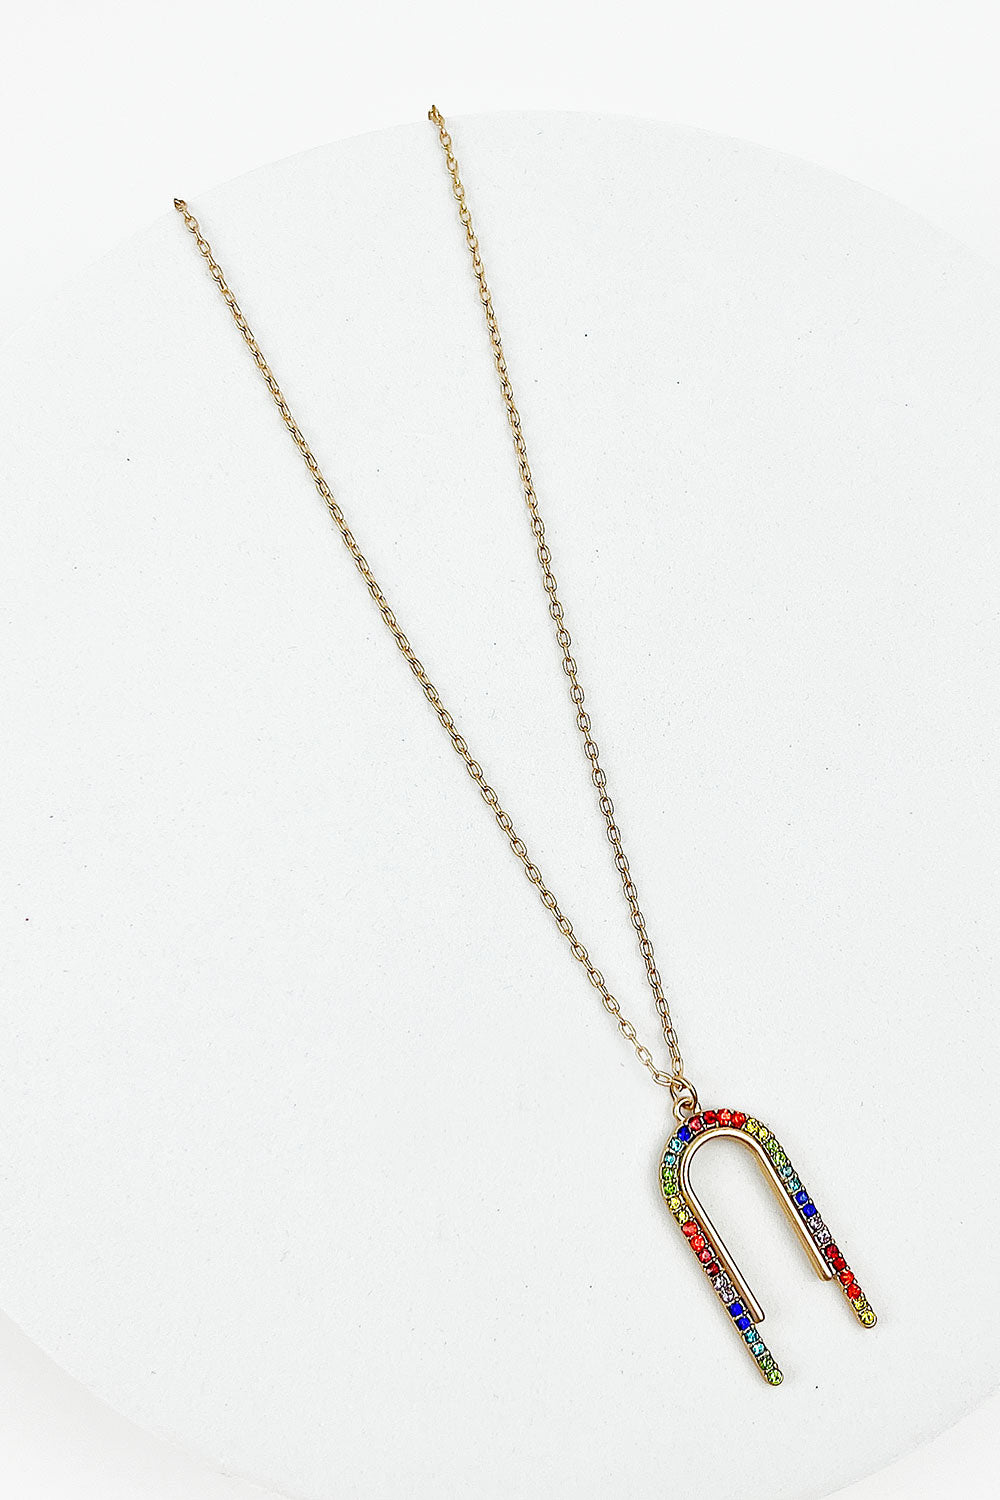 ARCH SHAPED GLASS BEADED NECKLACE